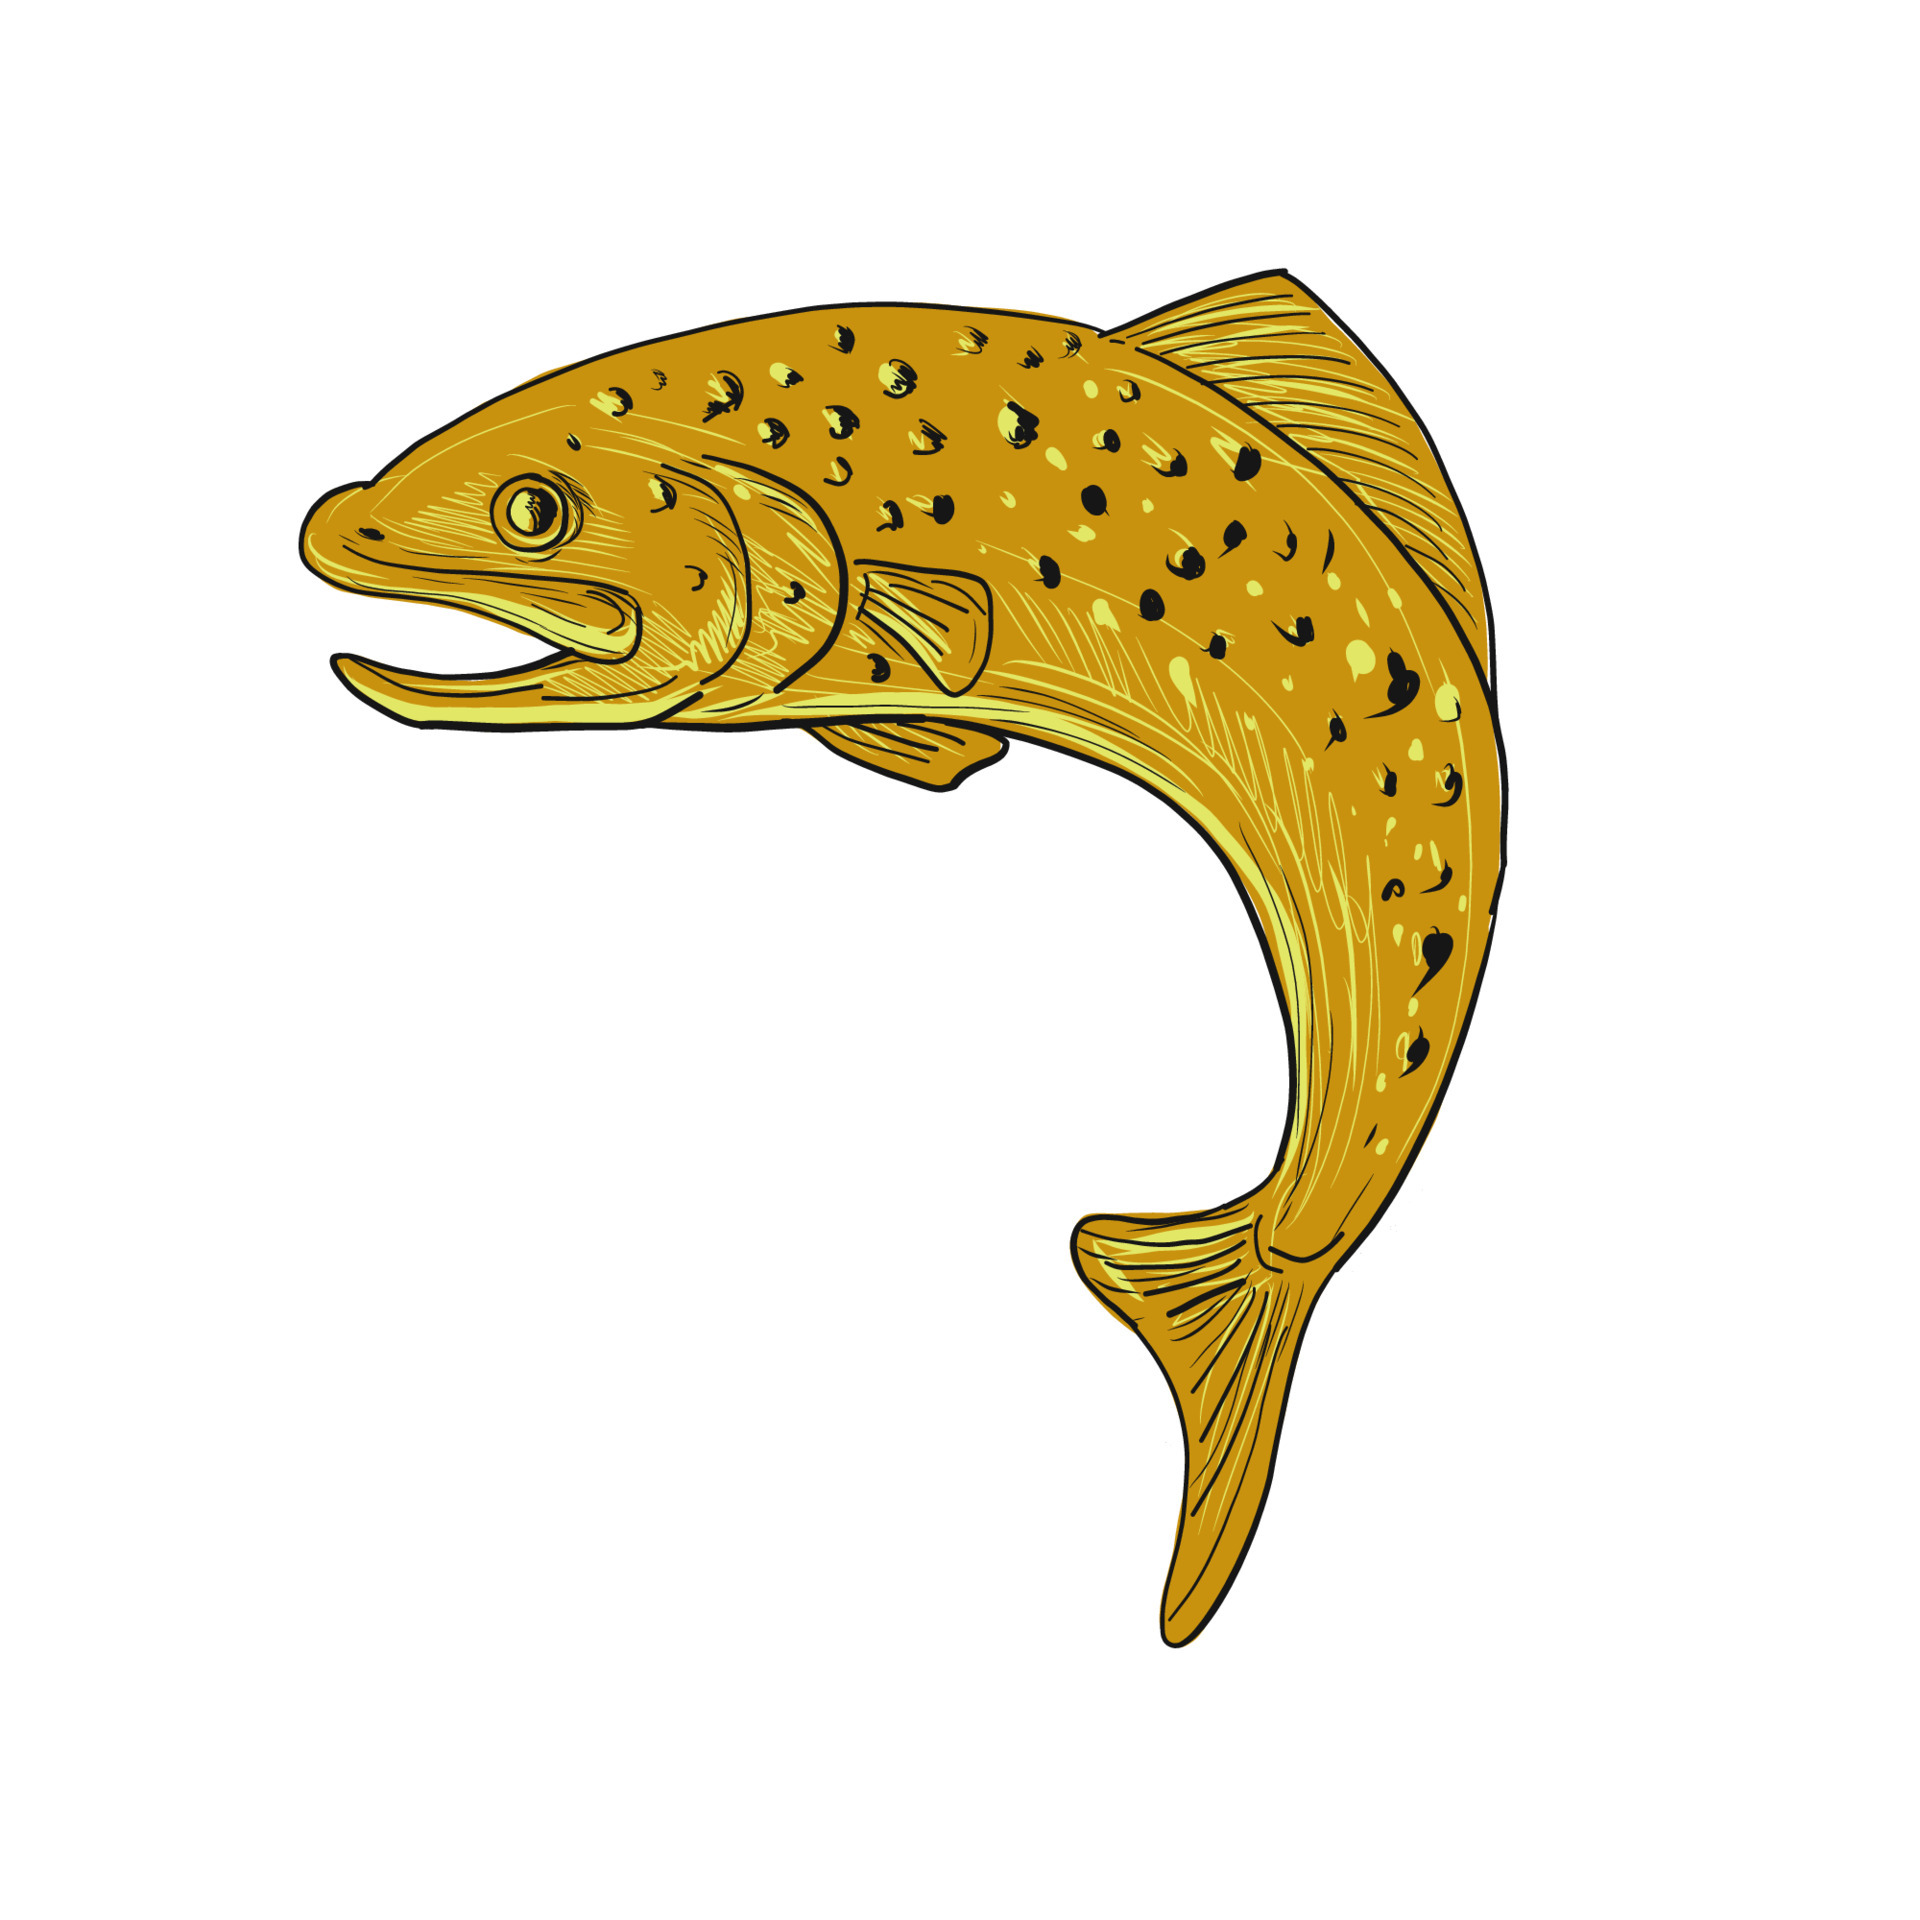 https://static.vecteezy.com/system/resources/previews/007/104/384/original/brown-trout-jumping-drawing-vector.jpg